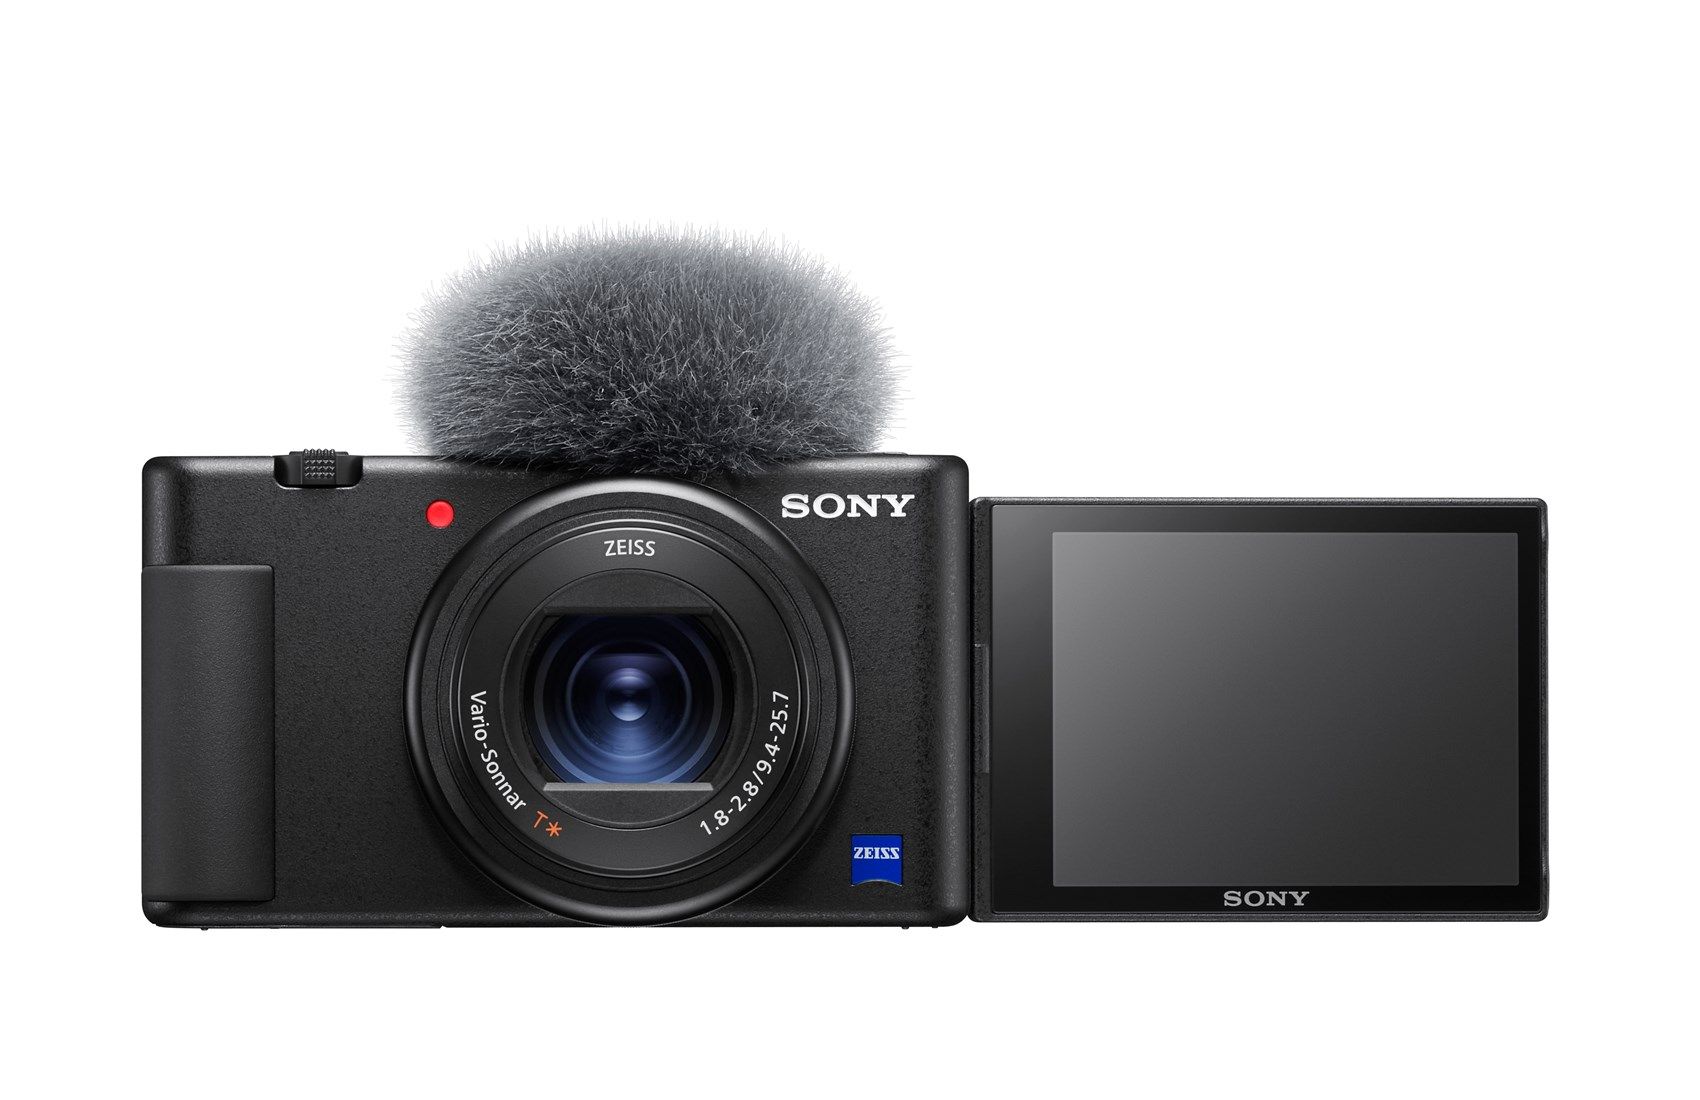 Sony ZV-1 Compact Digital Camera 4K UHD - Black With Wireless Remote Commander GP-VPT2BT - Product Photo 7 - Front view of the camera with the screen extended and microphone wind shield attached